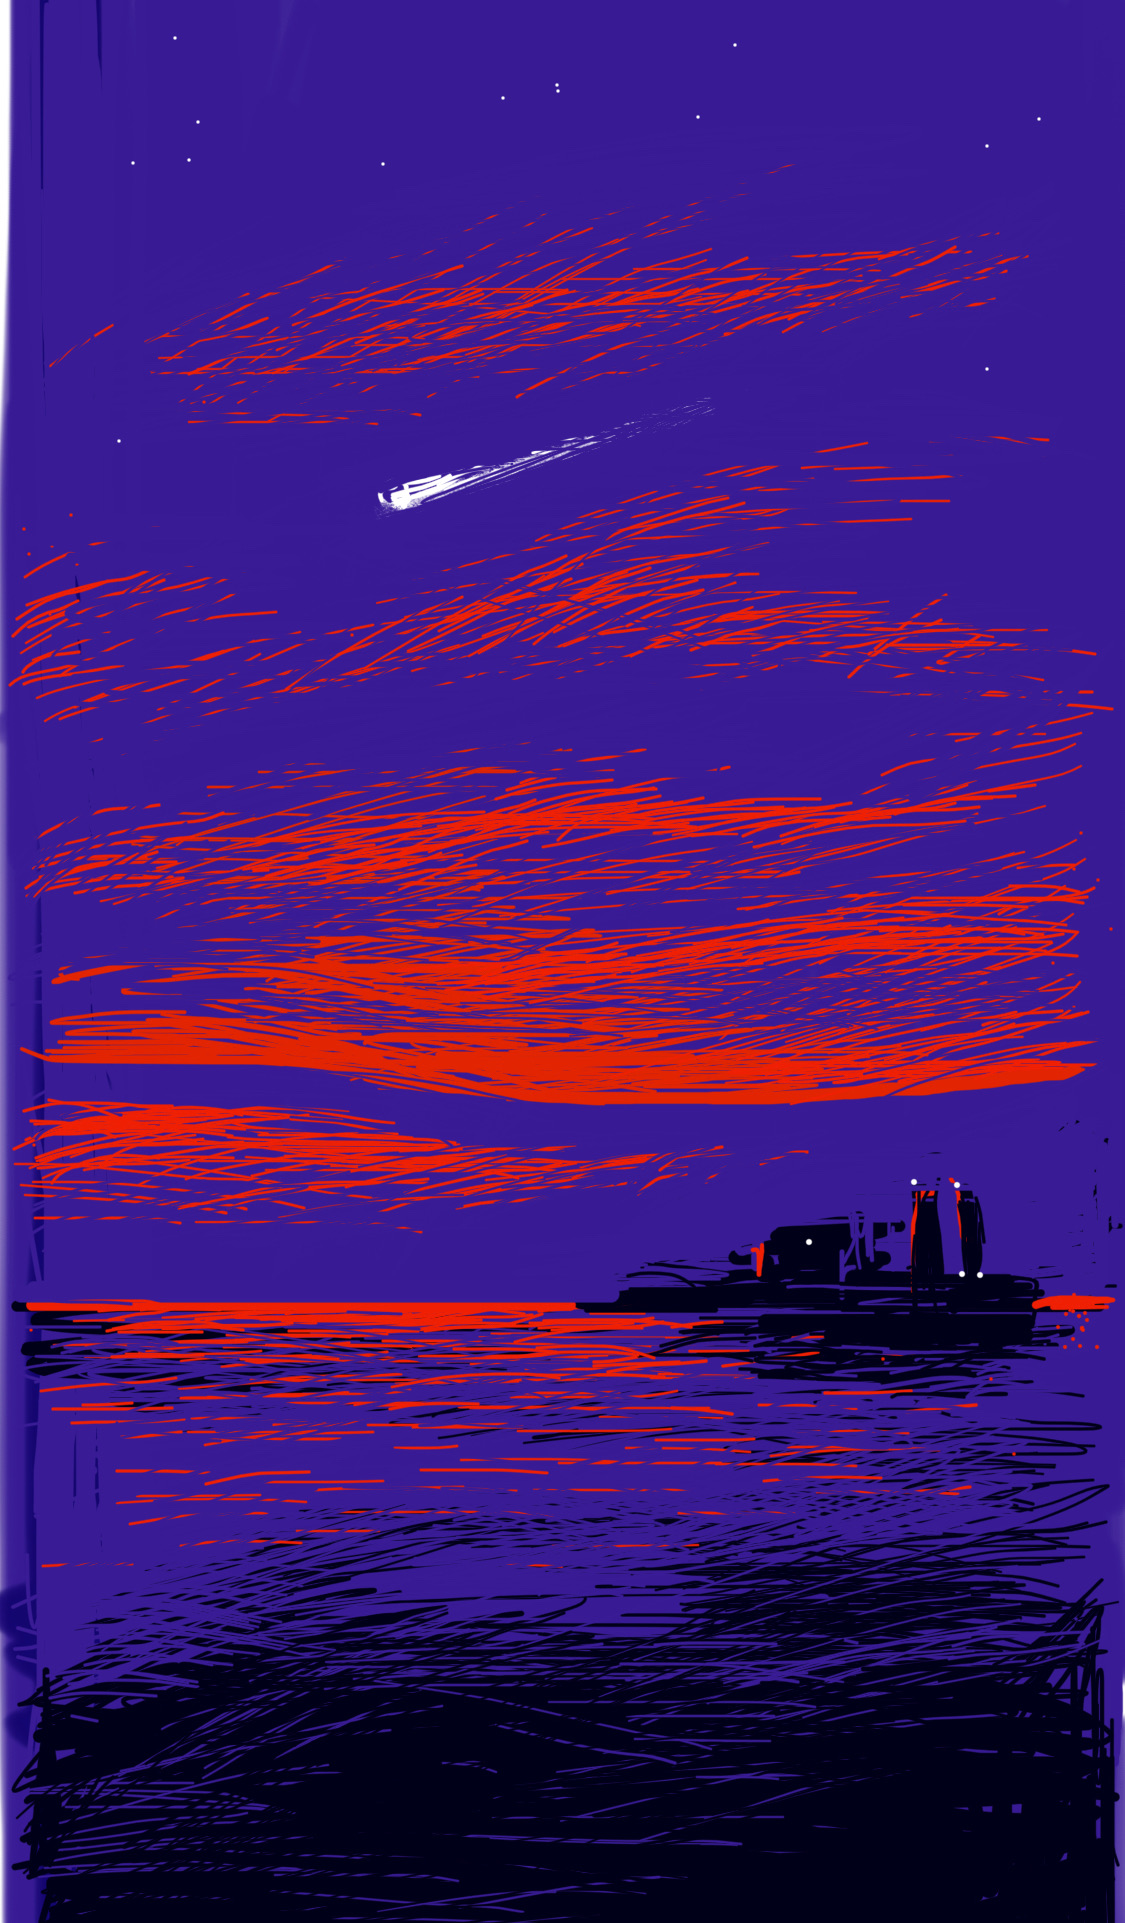 A view over the ocean at night, with a ship on the water and a comet in the sky